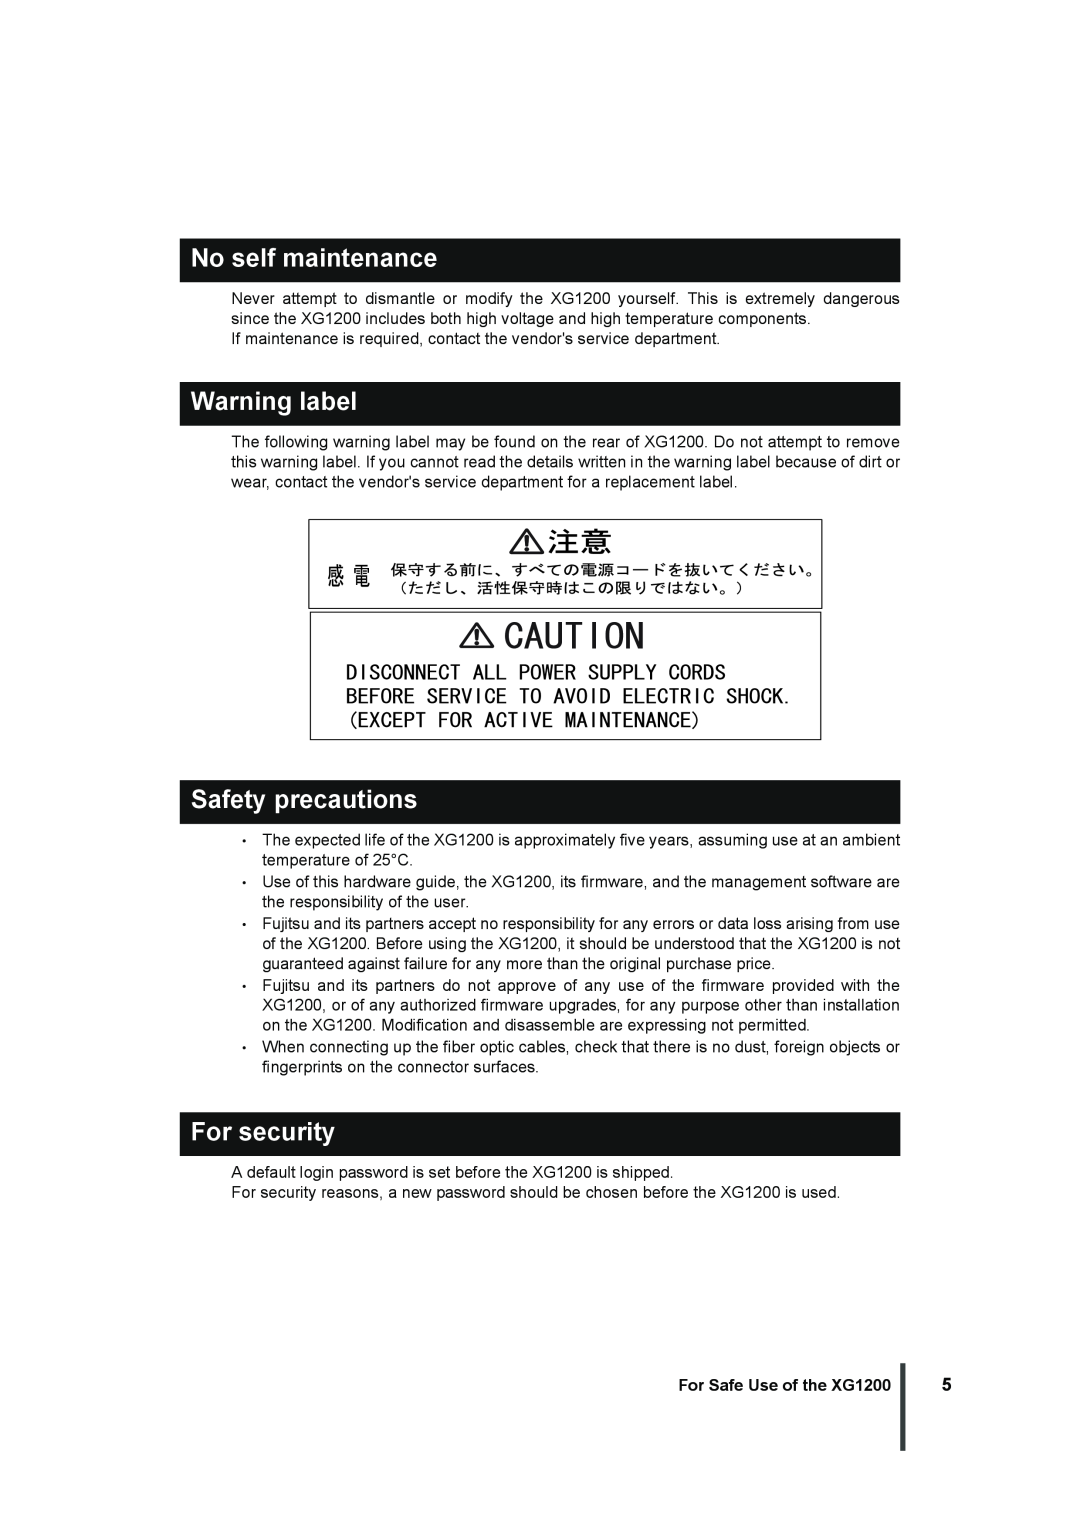 Fujitsu manual No self maintenance, Warning label, Safety precautions, For security, For Safe Use of the XG1200 